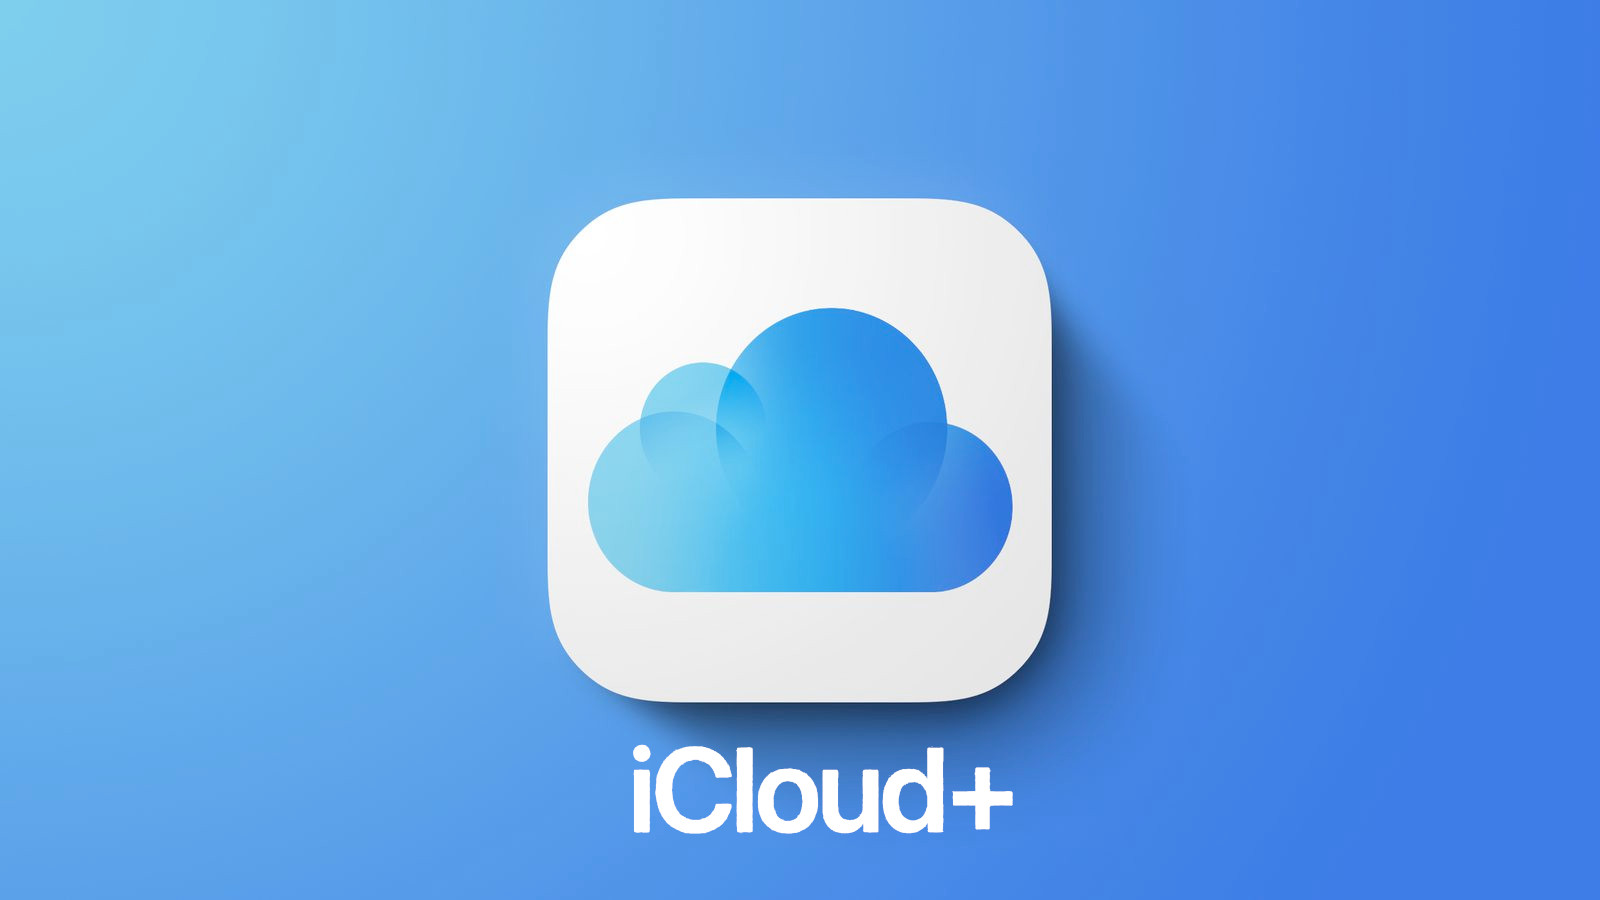 iCloud+ 50GB - 3 Months Trial Subscription US (ONLY FOR NEW ACCOUNTS) 0.31$